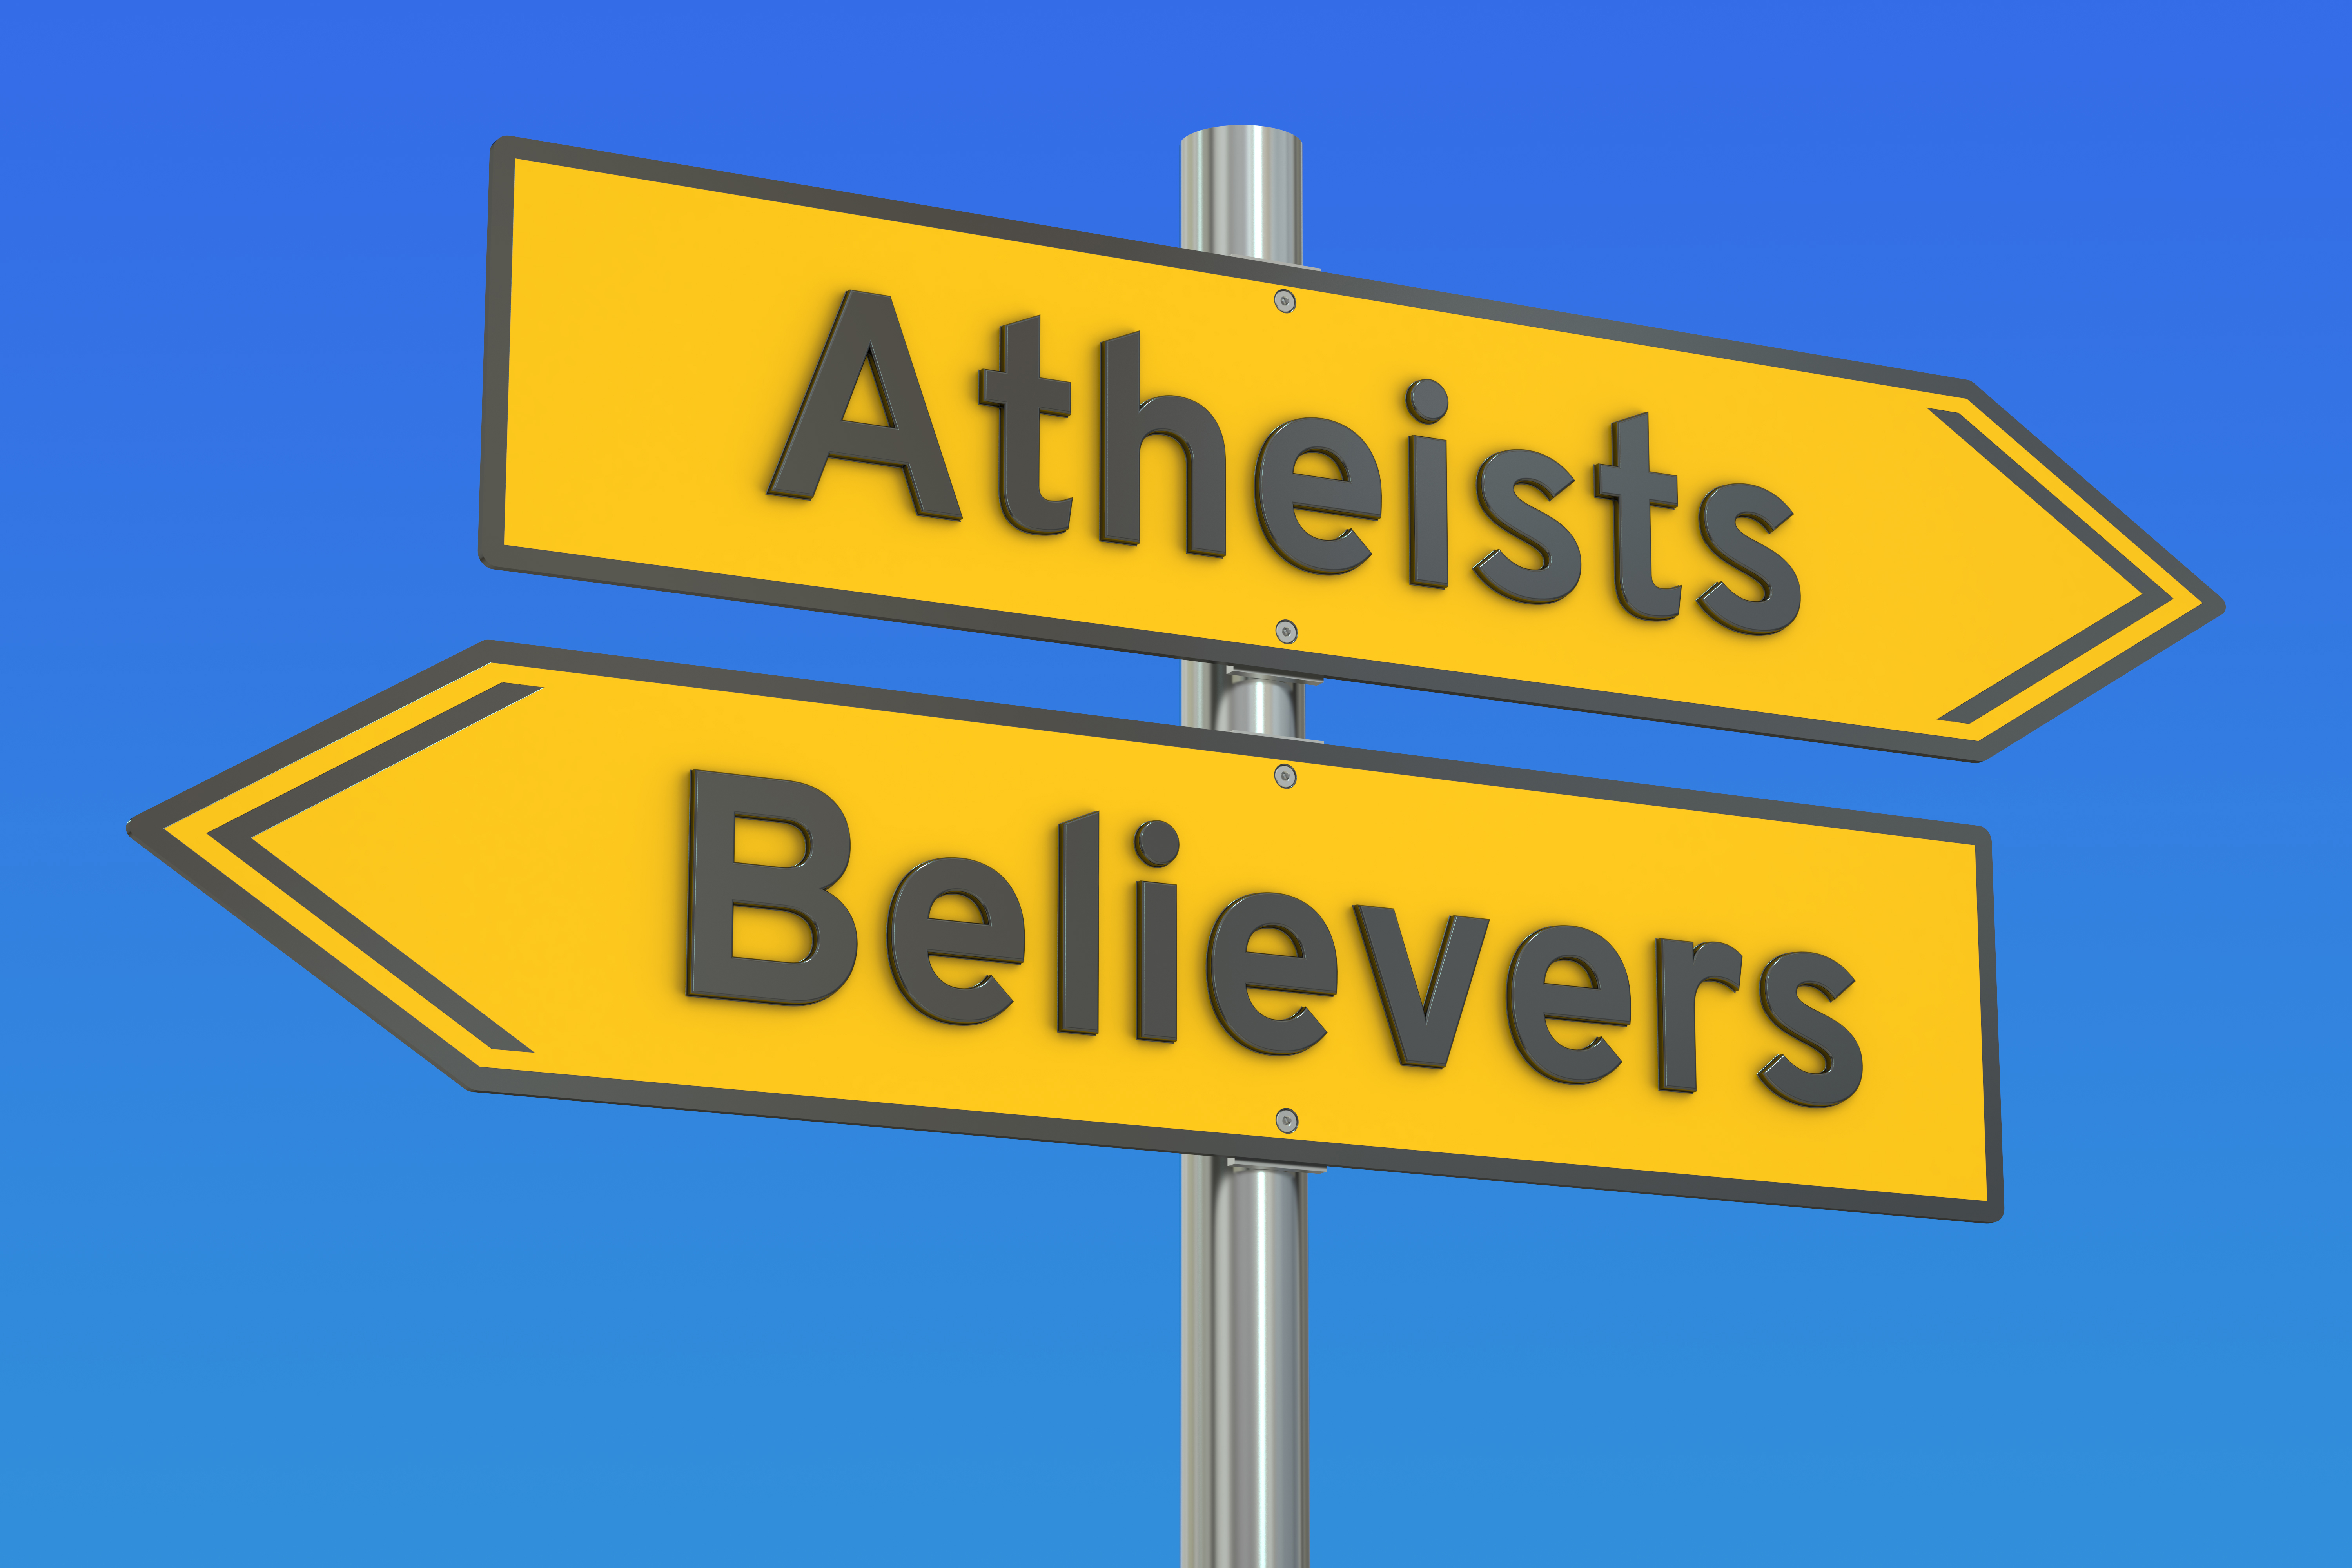 Atheists vs Believers - yellow sign with arrows going in opposite directions